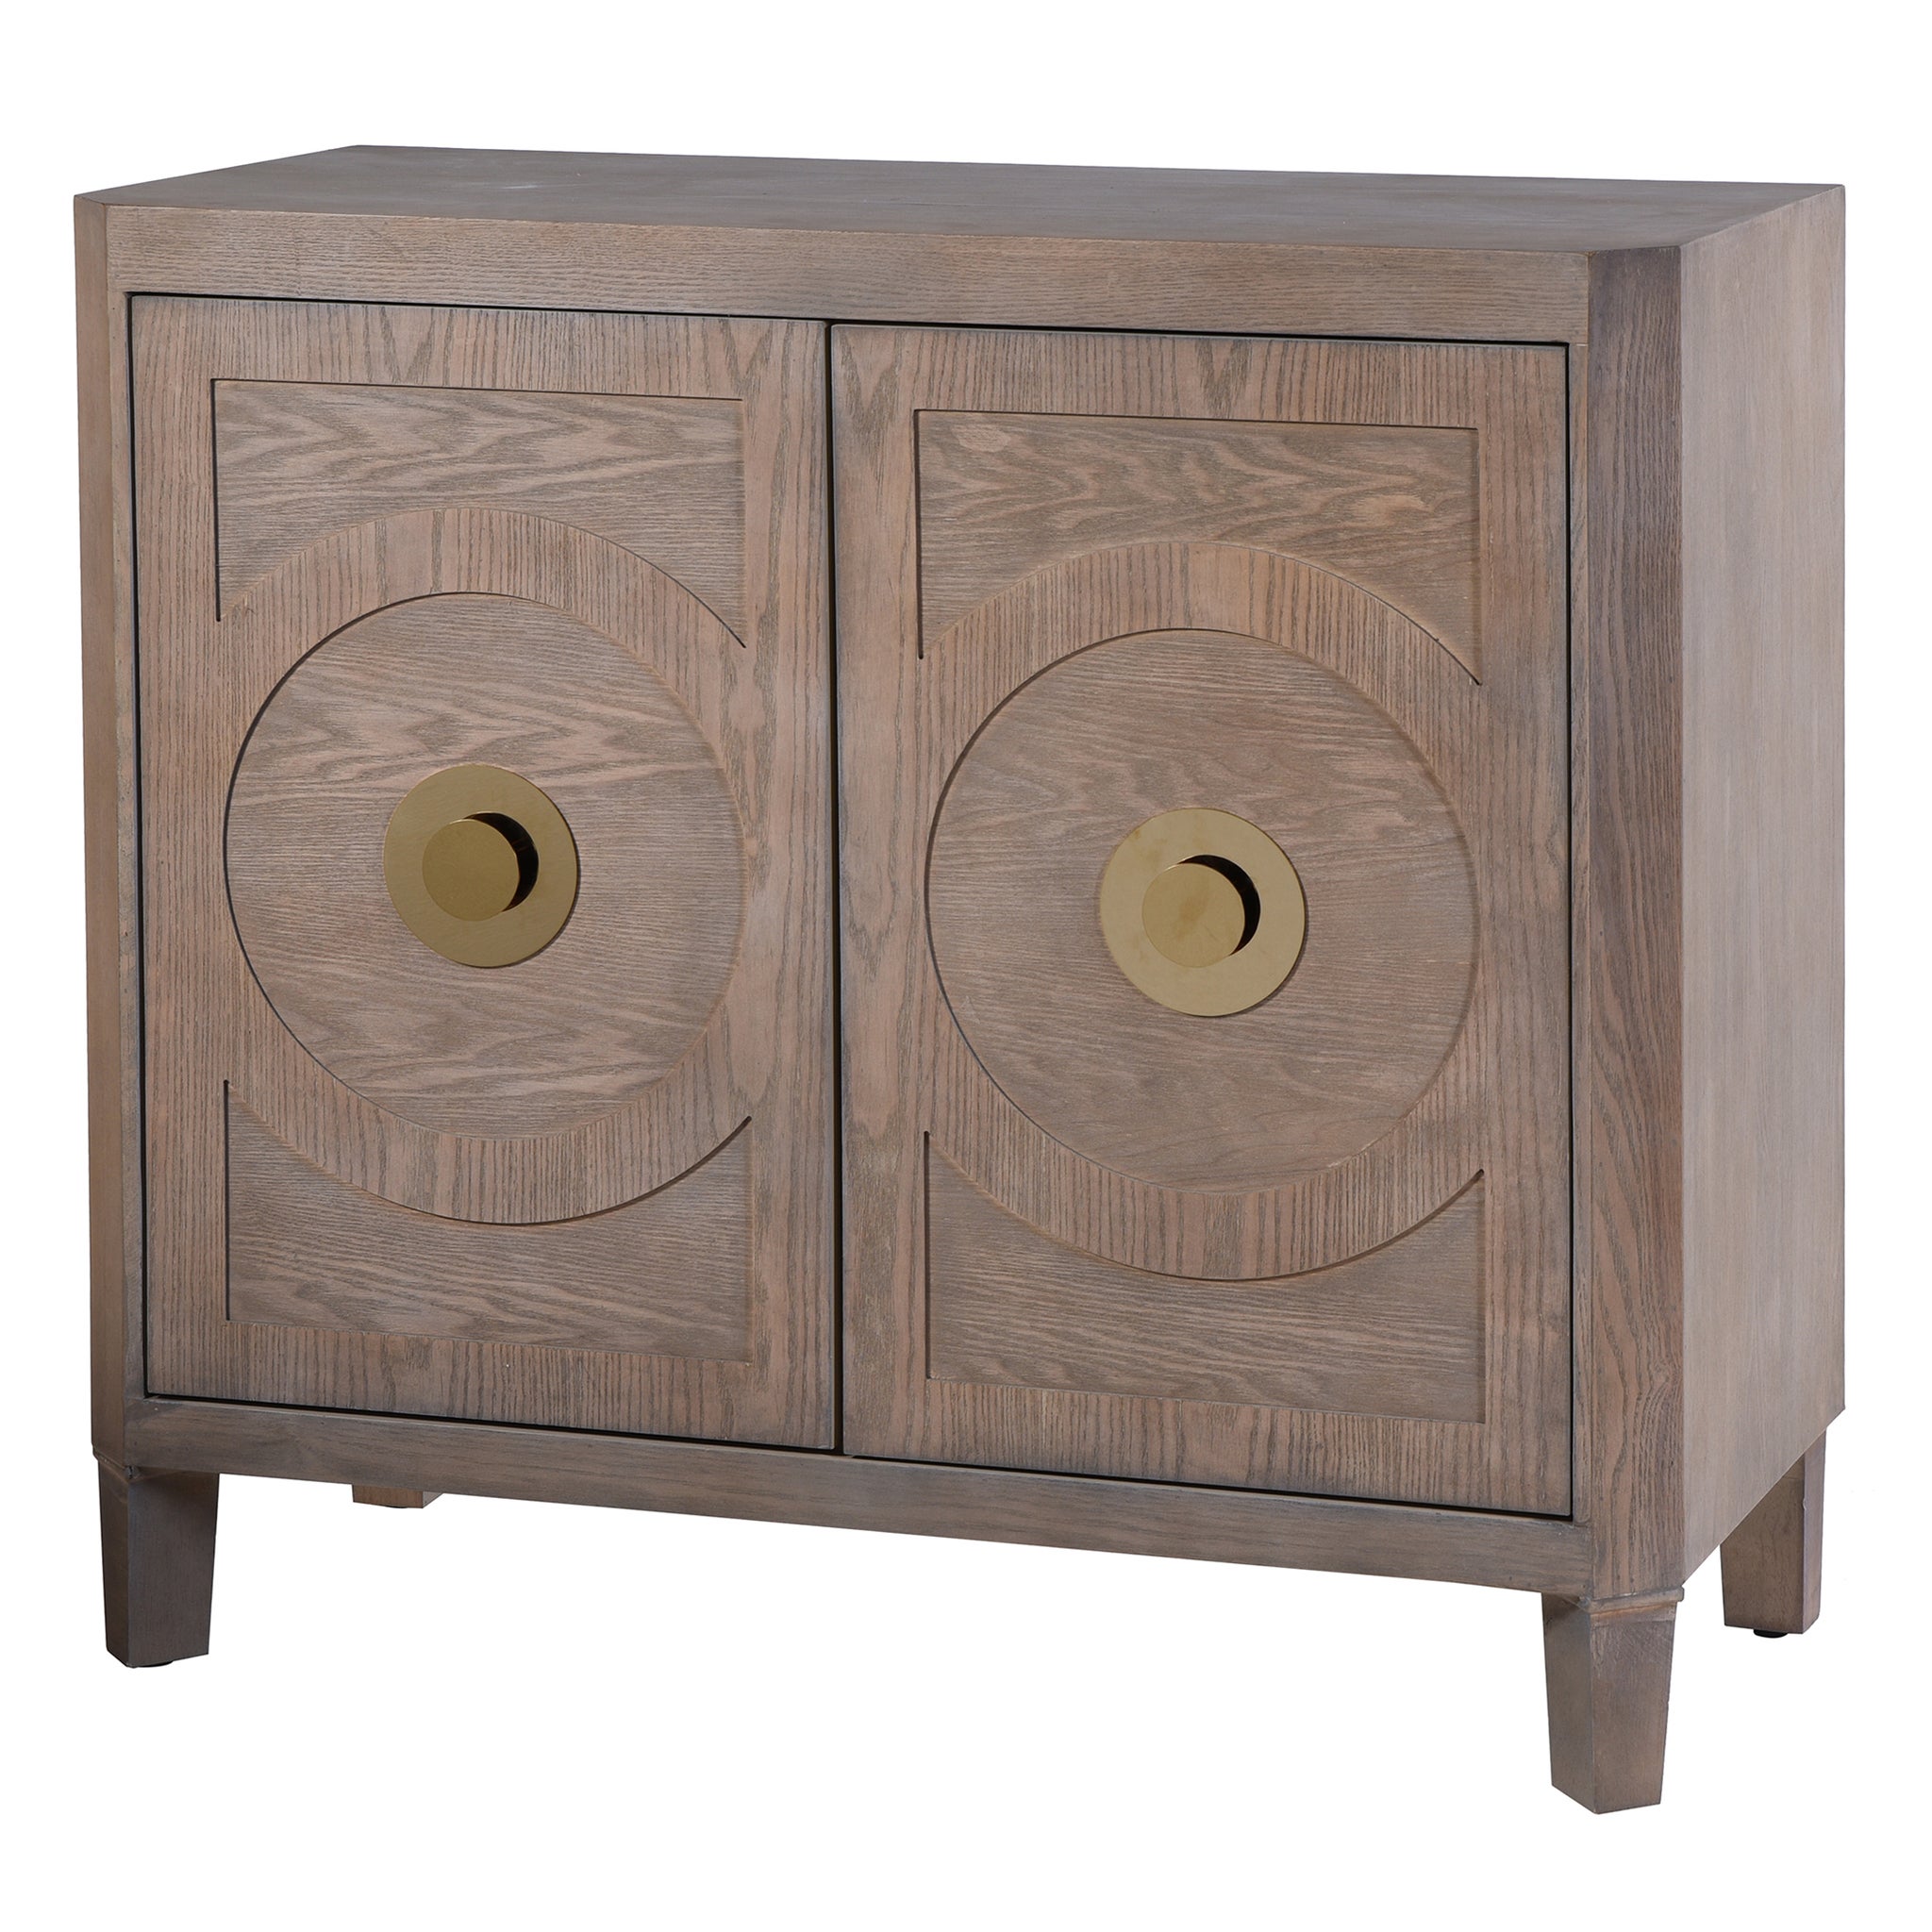 SF25659 by Style Craft - SOPHIE CHEST 32in w. X 32in ht. X 16in d. Three  Drawer Chest with Laser Cut Stainless Steel Over